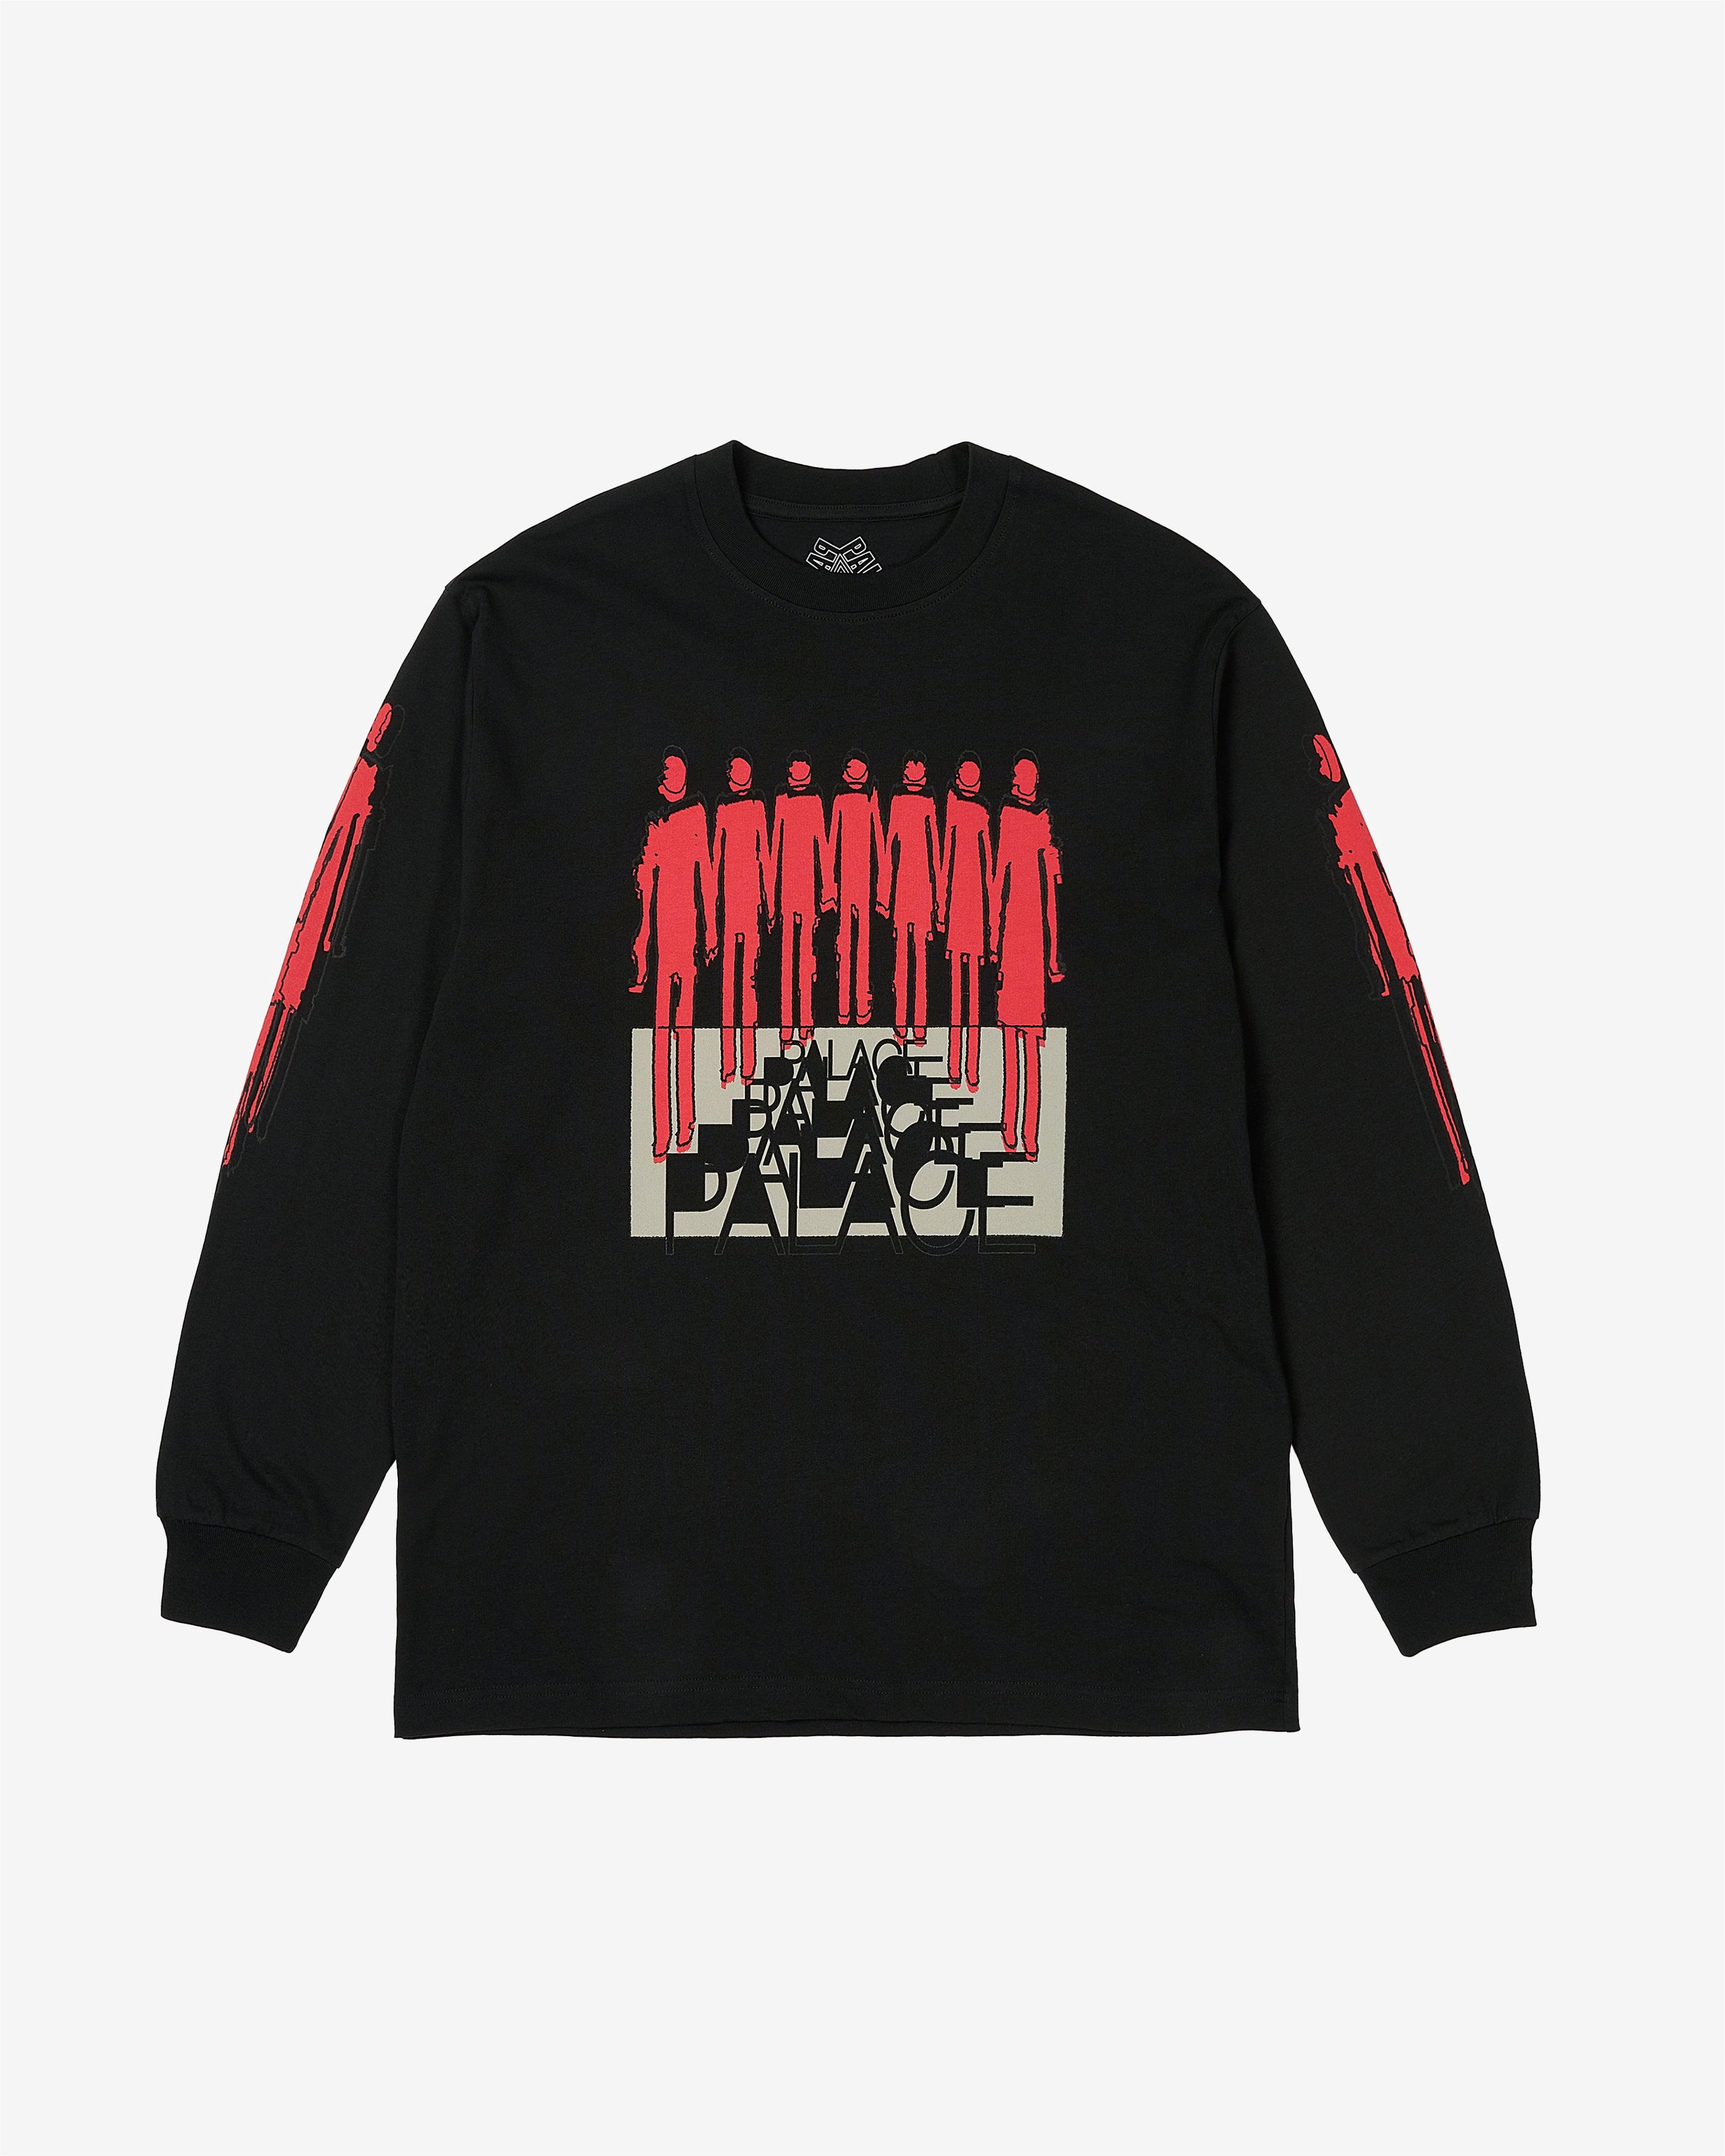 Palace - Men's Repeater Longsleeve - (Black) by PALACE